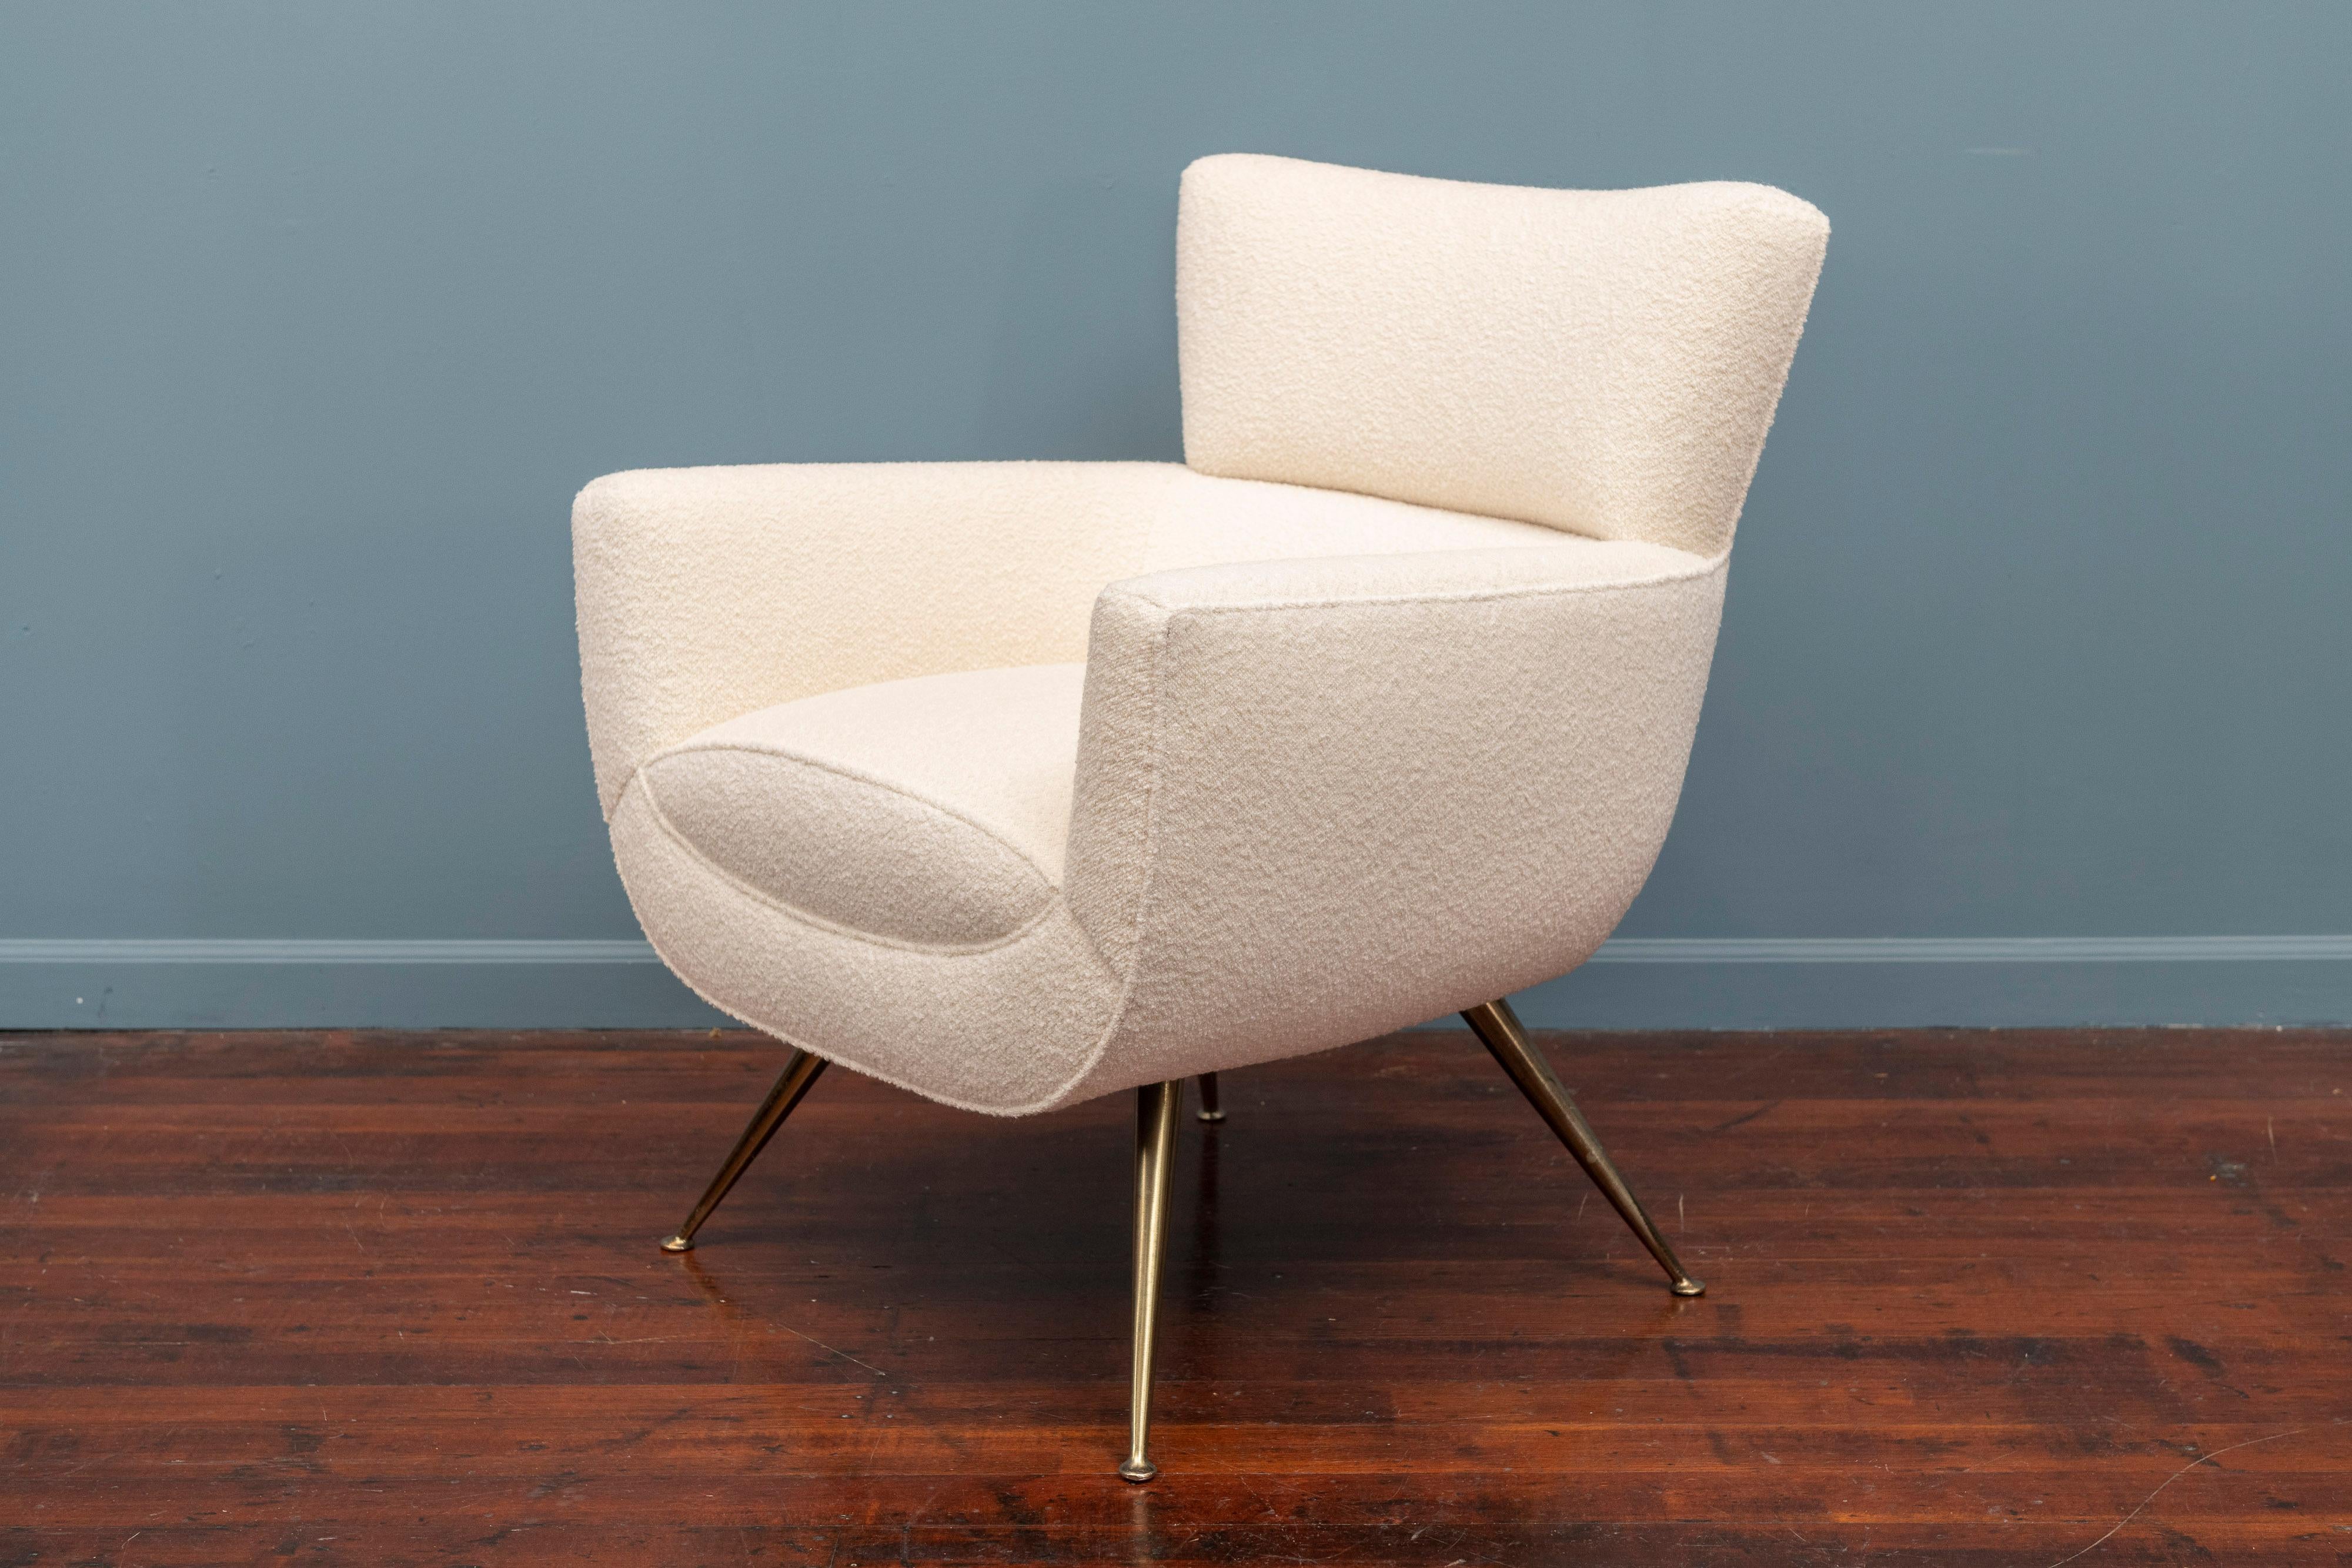 American Mid-Century Modern Lounge Chair by Henry Glass